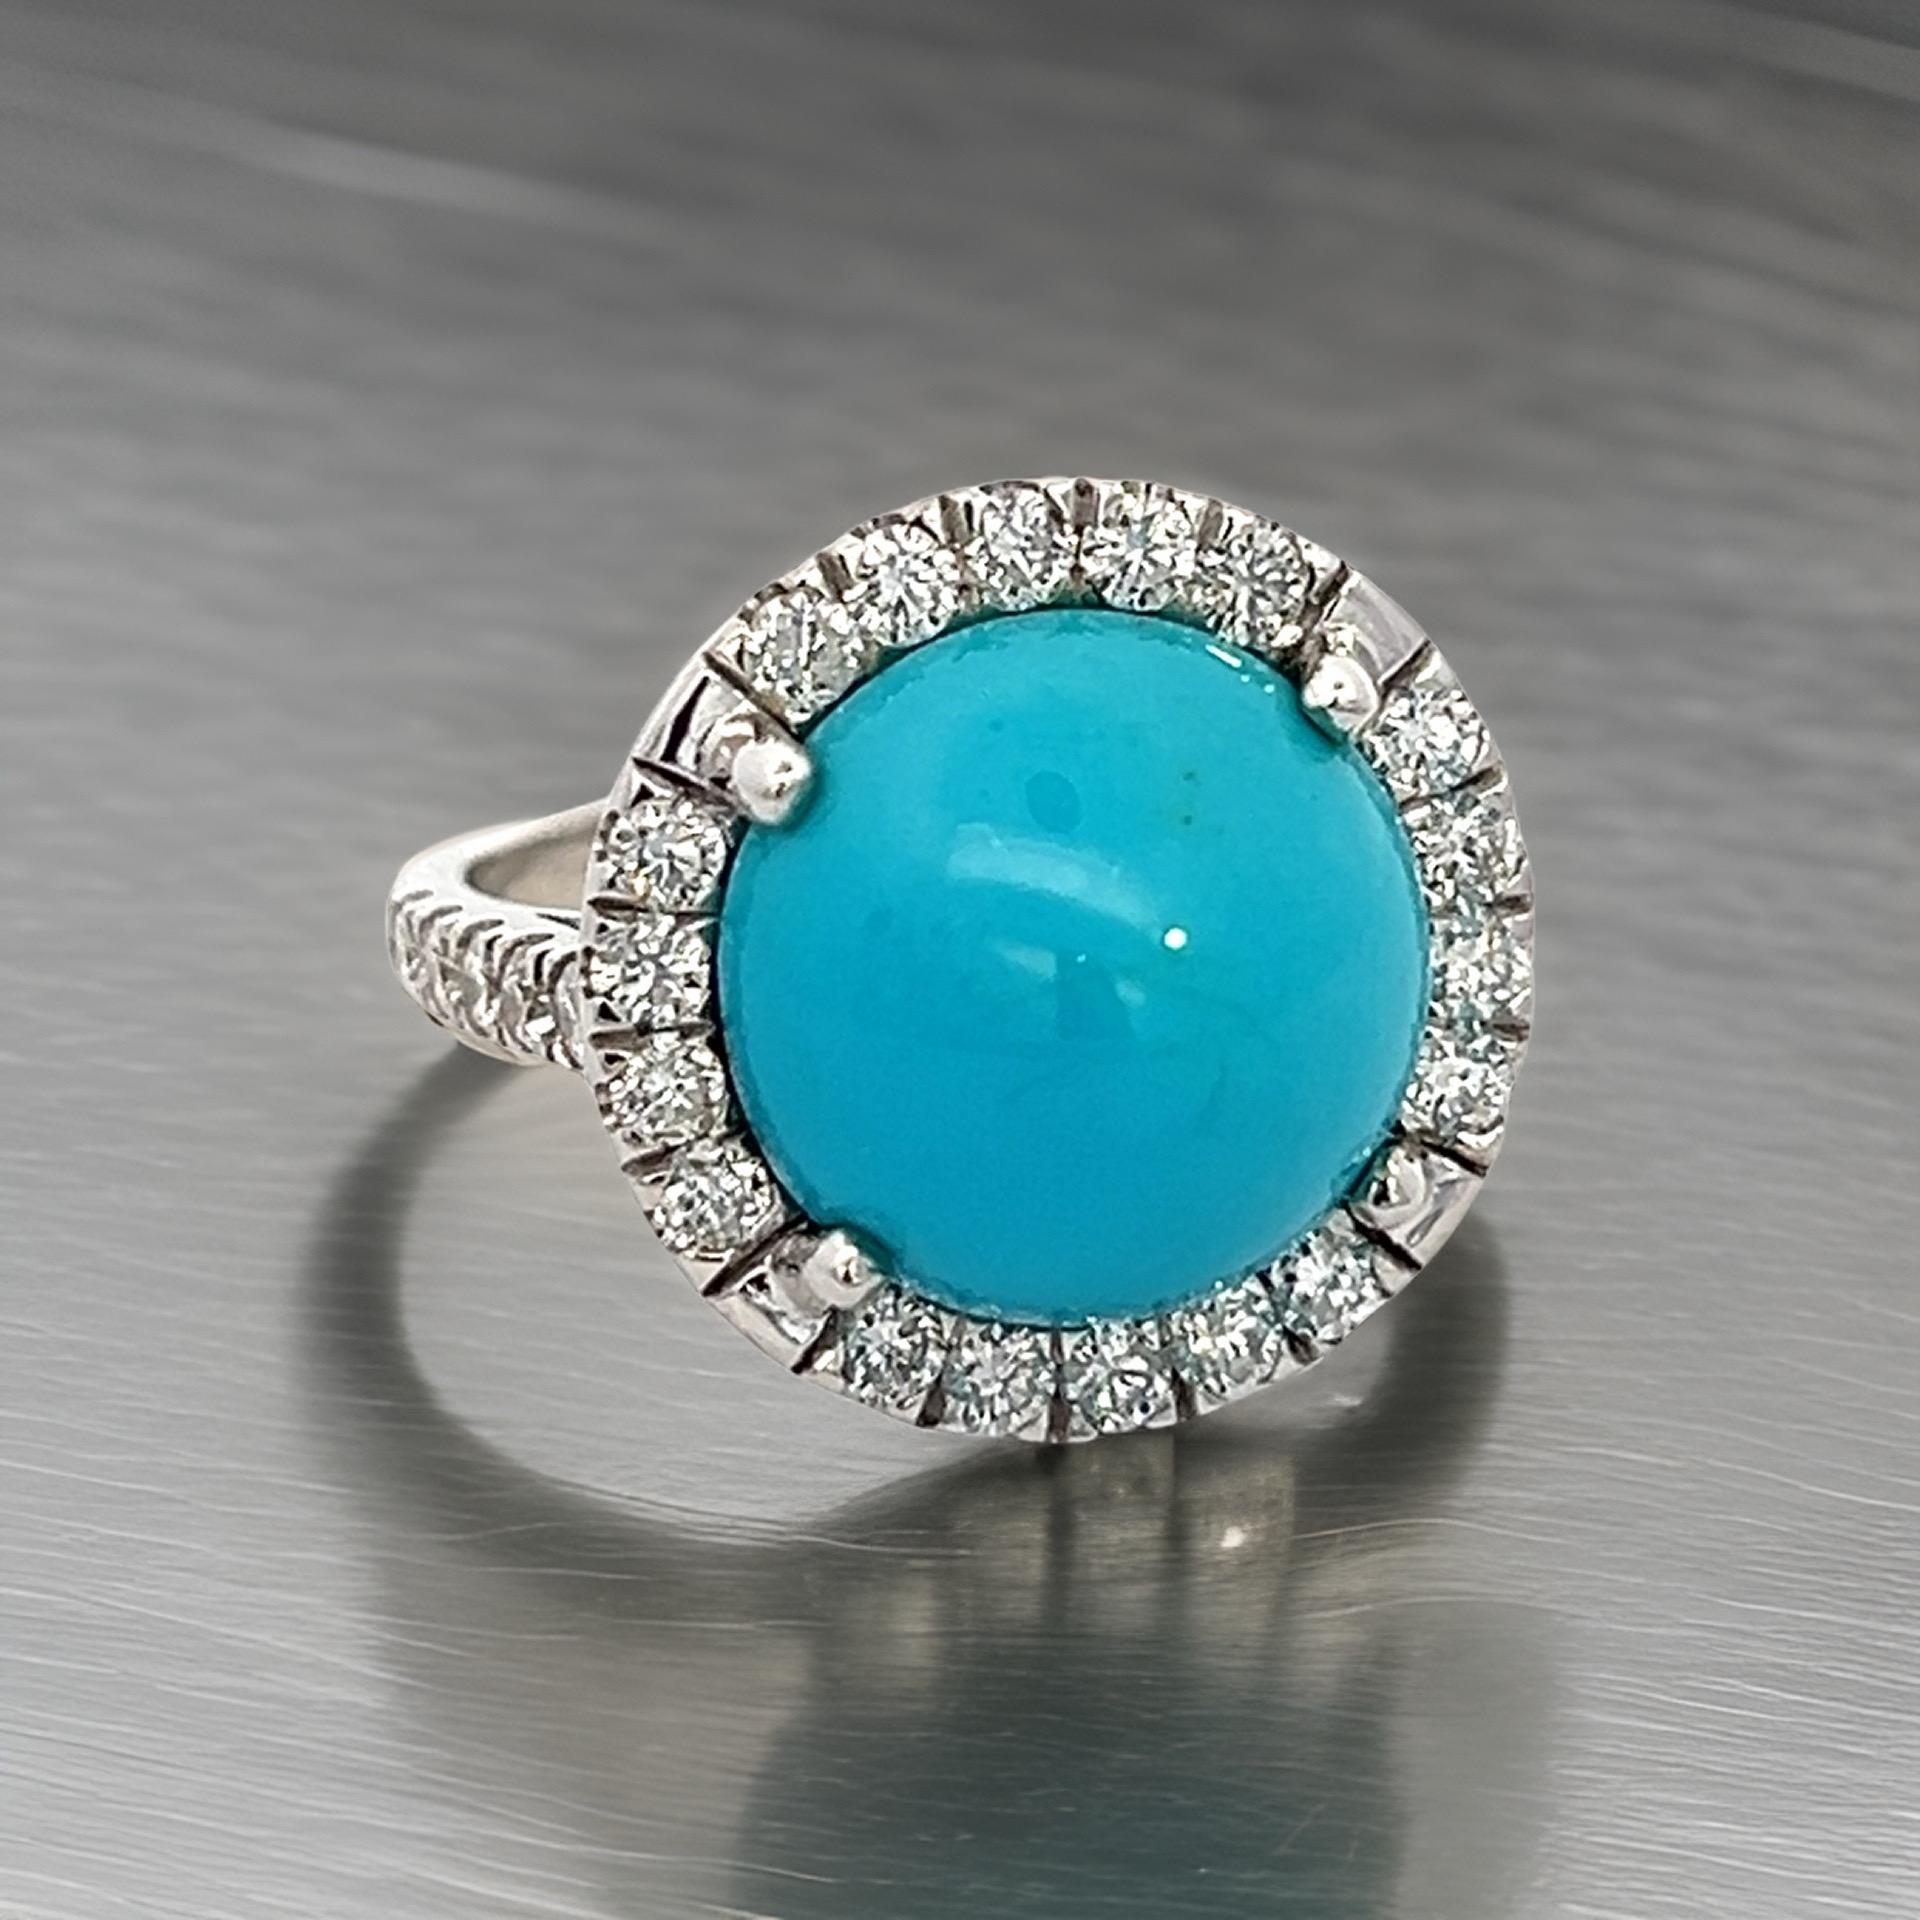 Magnificent Natural Persian Turquoise and  Diamond Ring 6.5 14k WG 8.33 TCW Certified $5,950 310657

Nothing says, “I Love you” more than Diamonds and Pearls!

This Turquoise and Diamond ring has been Certified, Inspected, and Appraised by